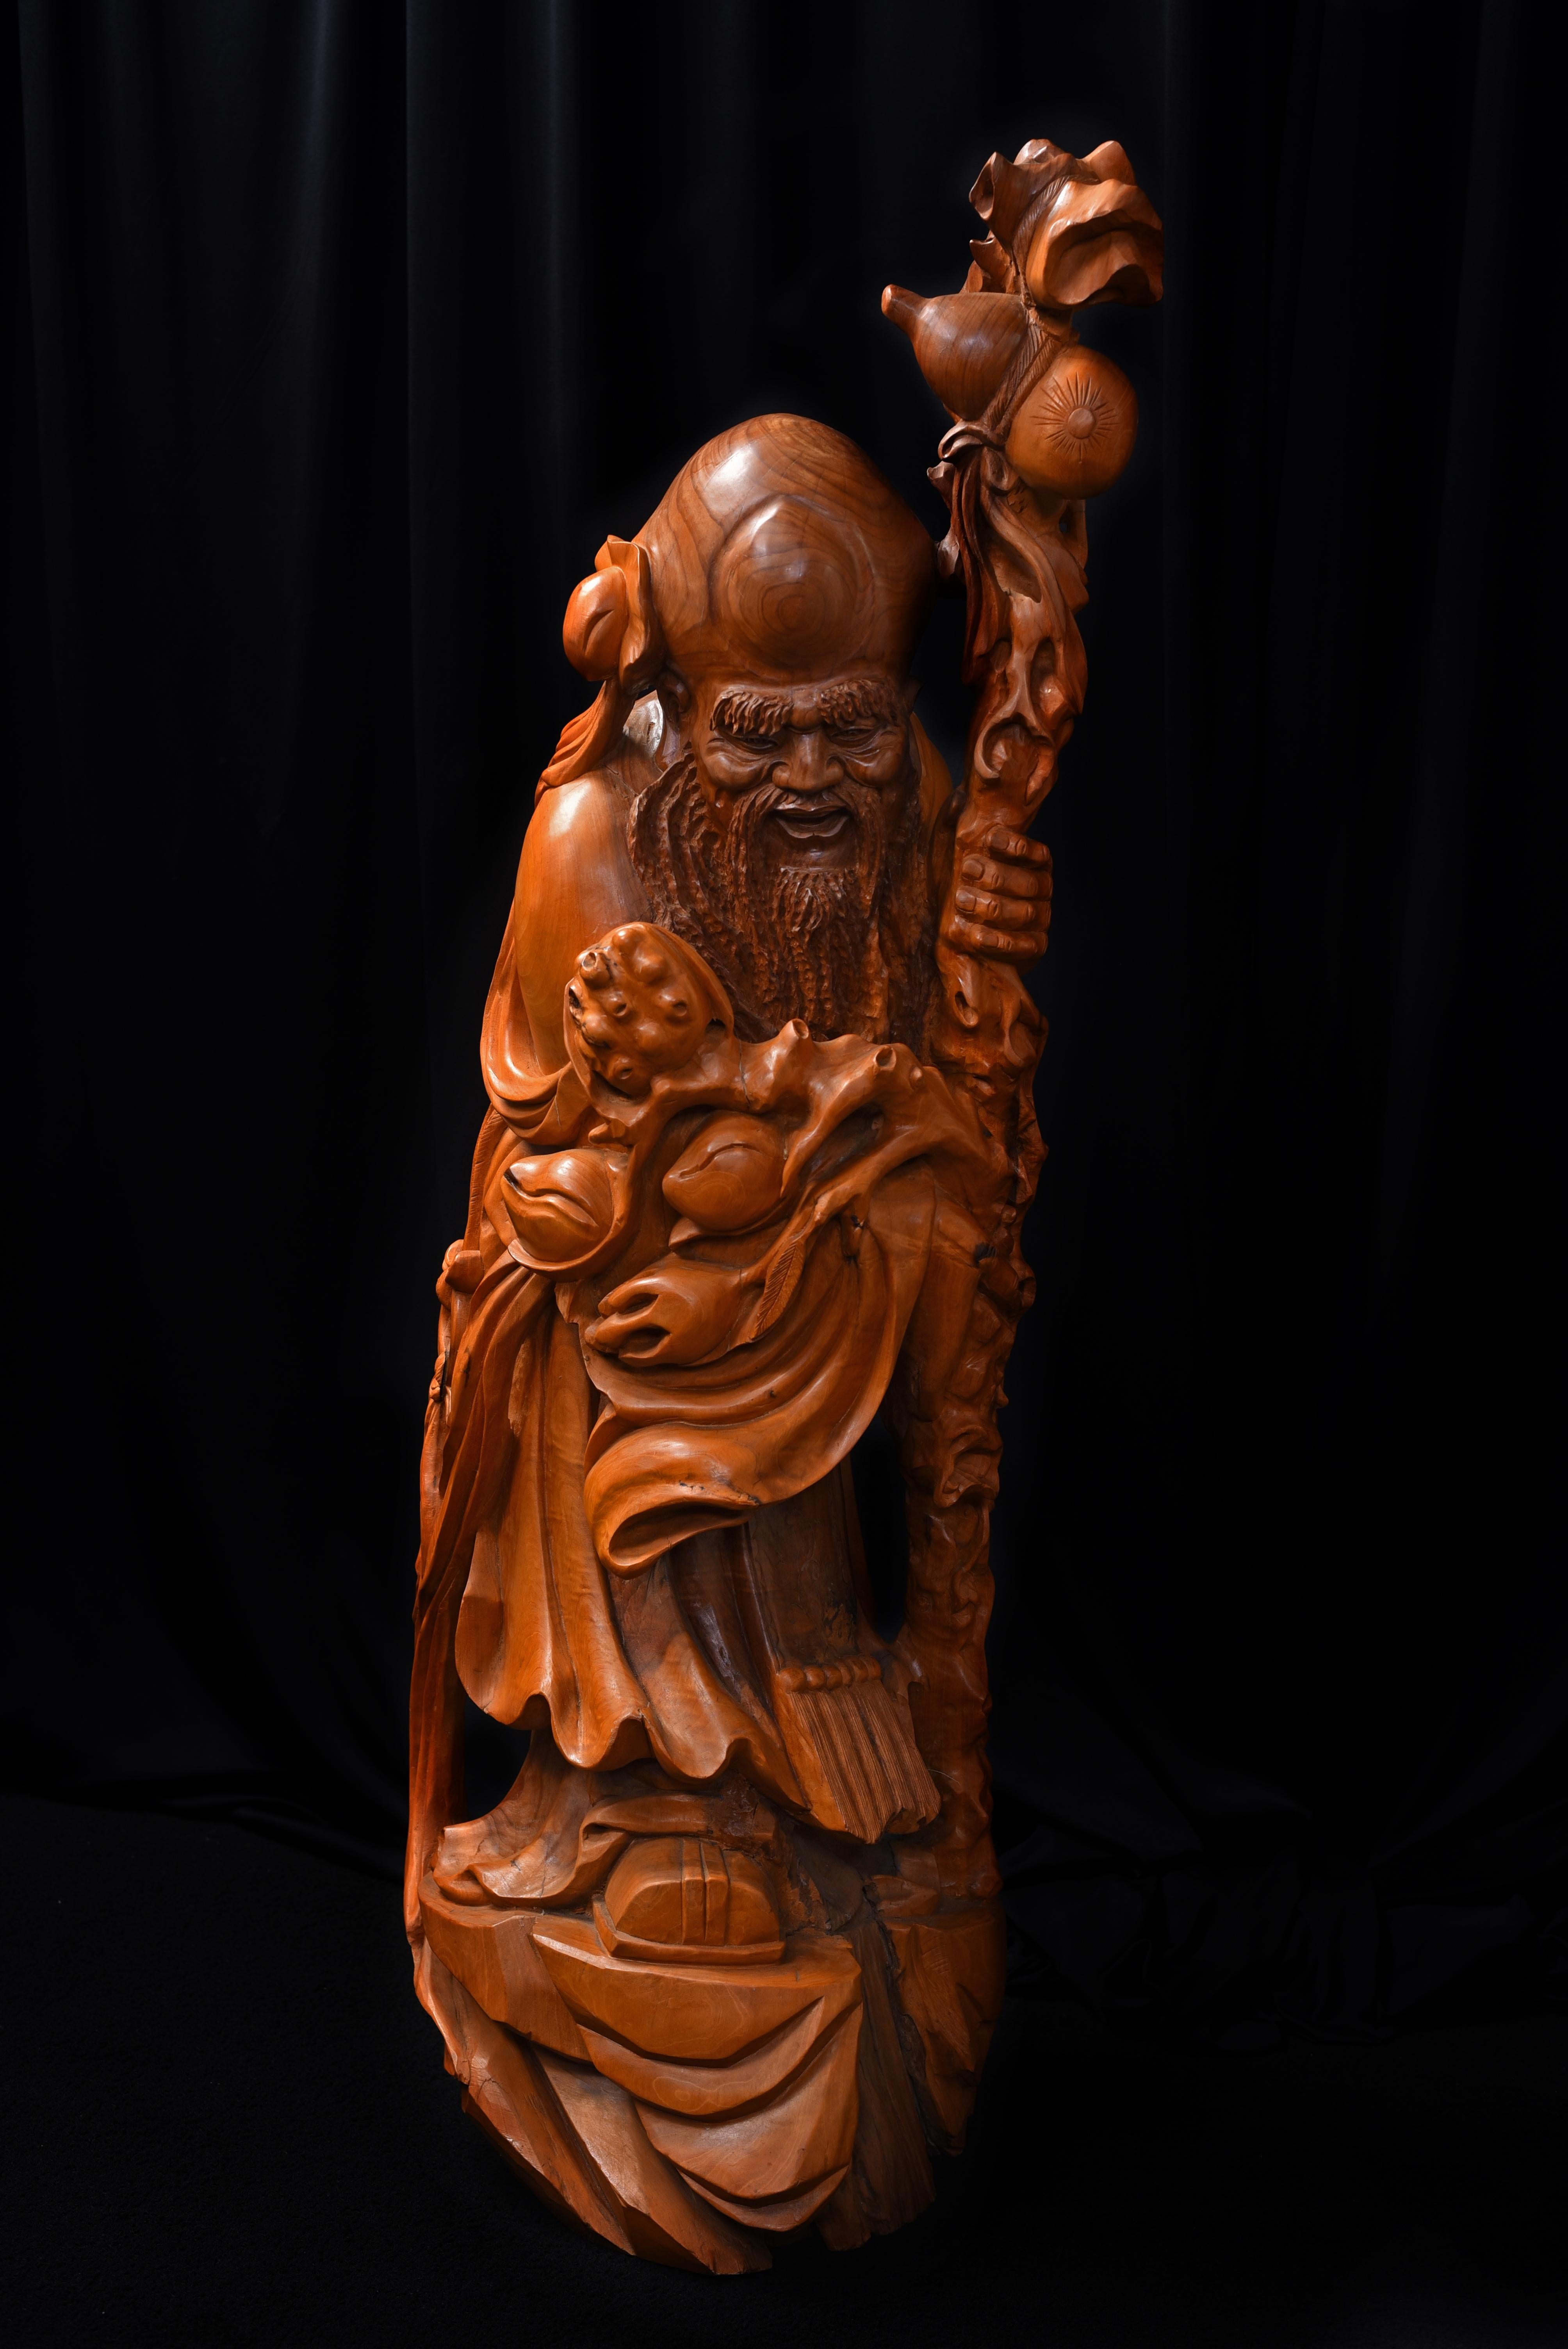 Stunning Chinese sculpture of Shou Xing God of Wisdom and Longevity.
Richly carved in organic burl wood.
circa 1960s.
Measure: 45.5